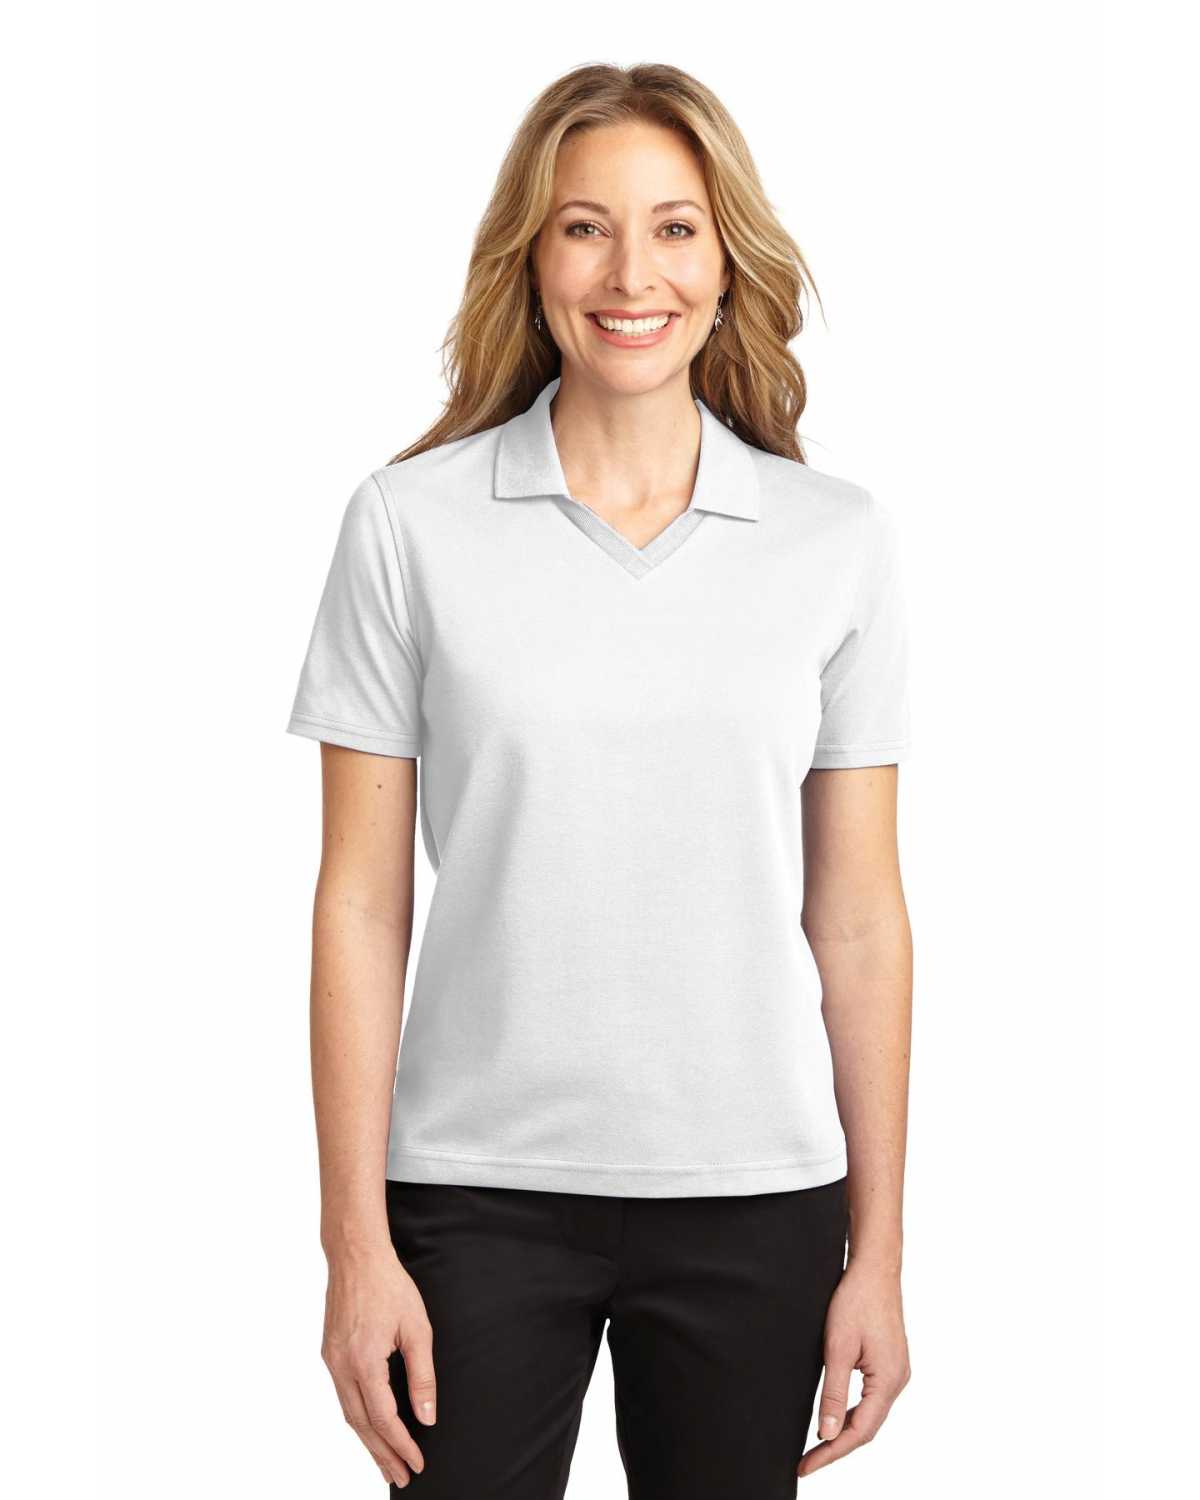 Port Authority L455 Ladies Rapid Dry Polo on discount | ApparelChoice.com